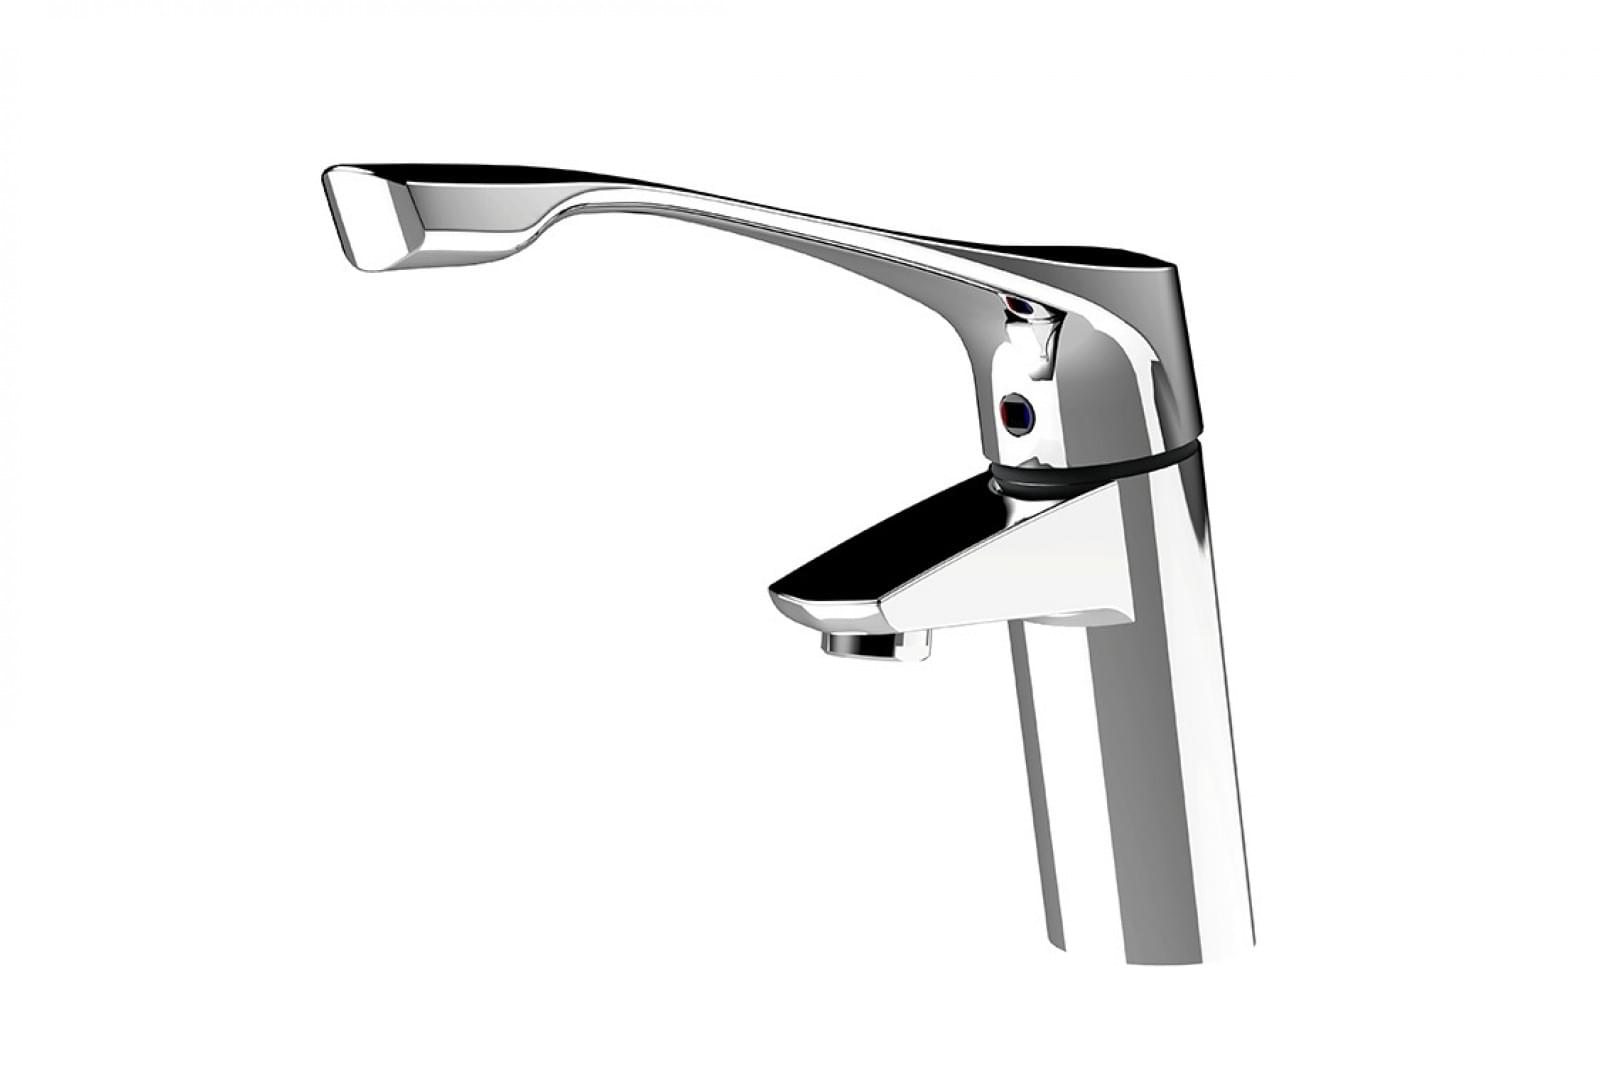 Enware-Oras Cubista Single Lever Basin Mixer with Accessible Extended Lever - SLM806D from Enware